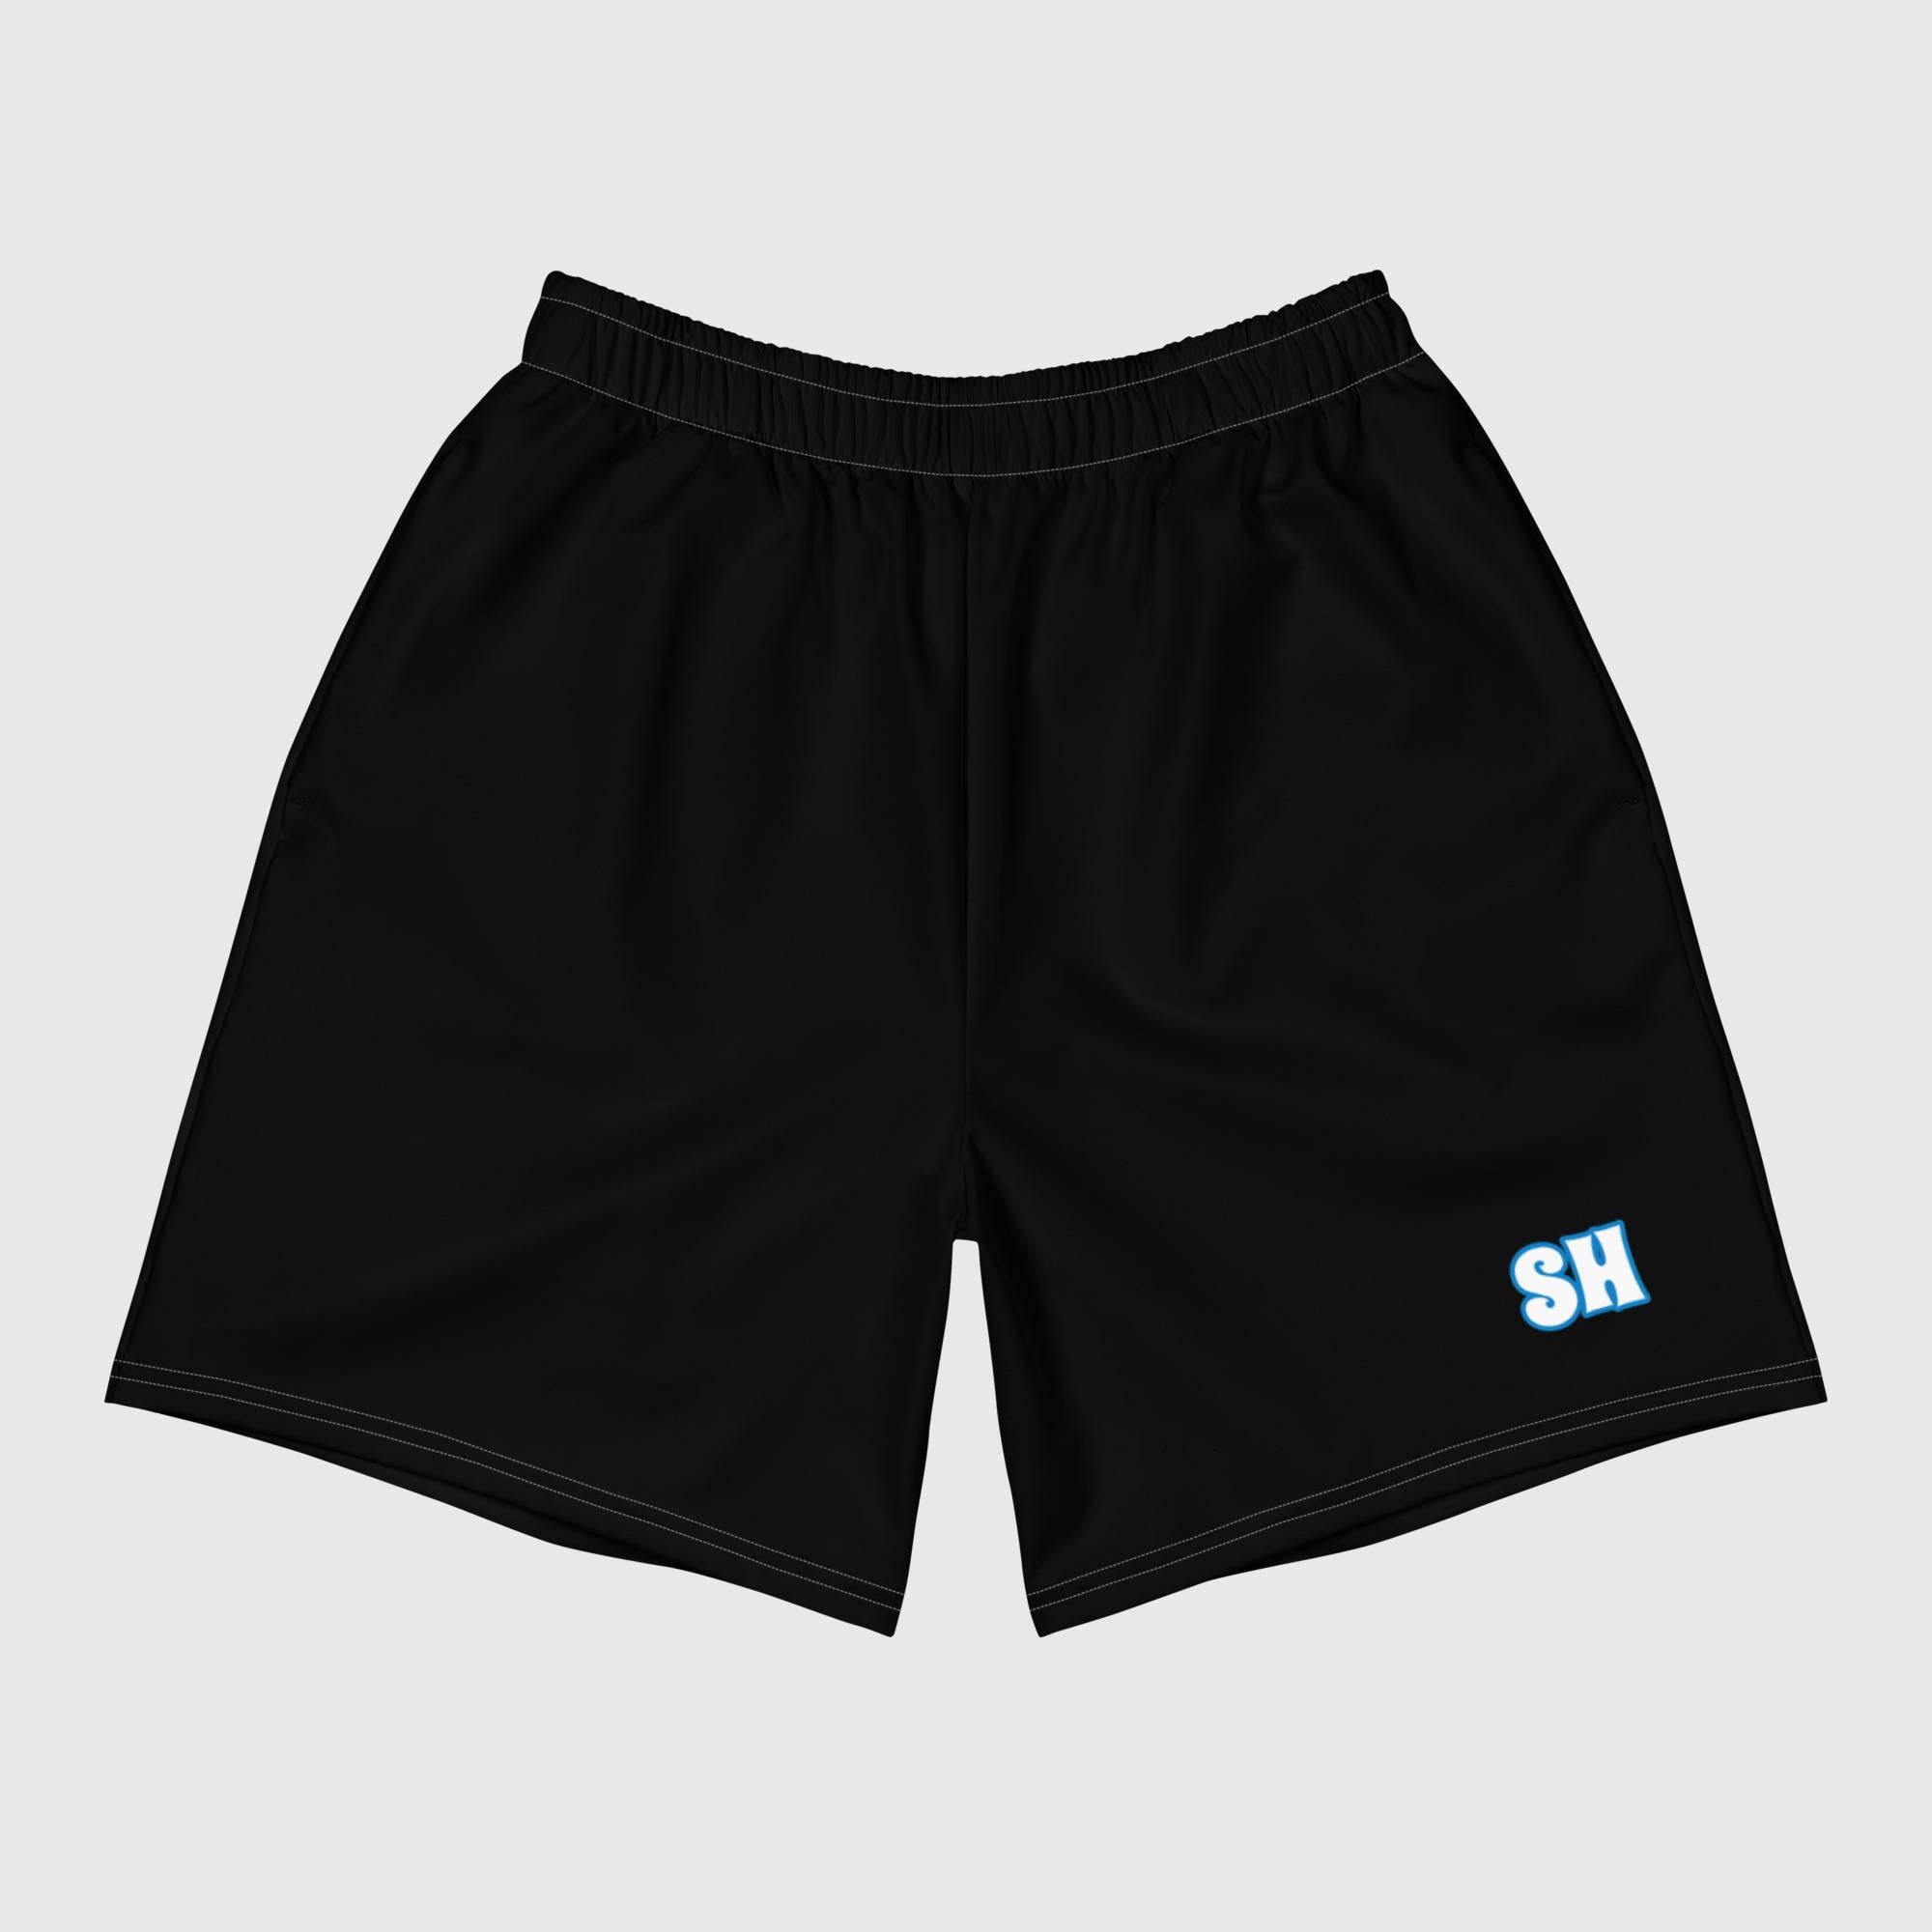 Men's Recycled Athletic Shorts - Black